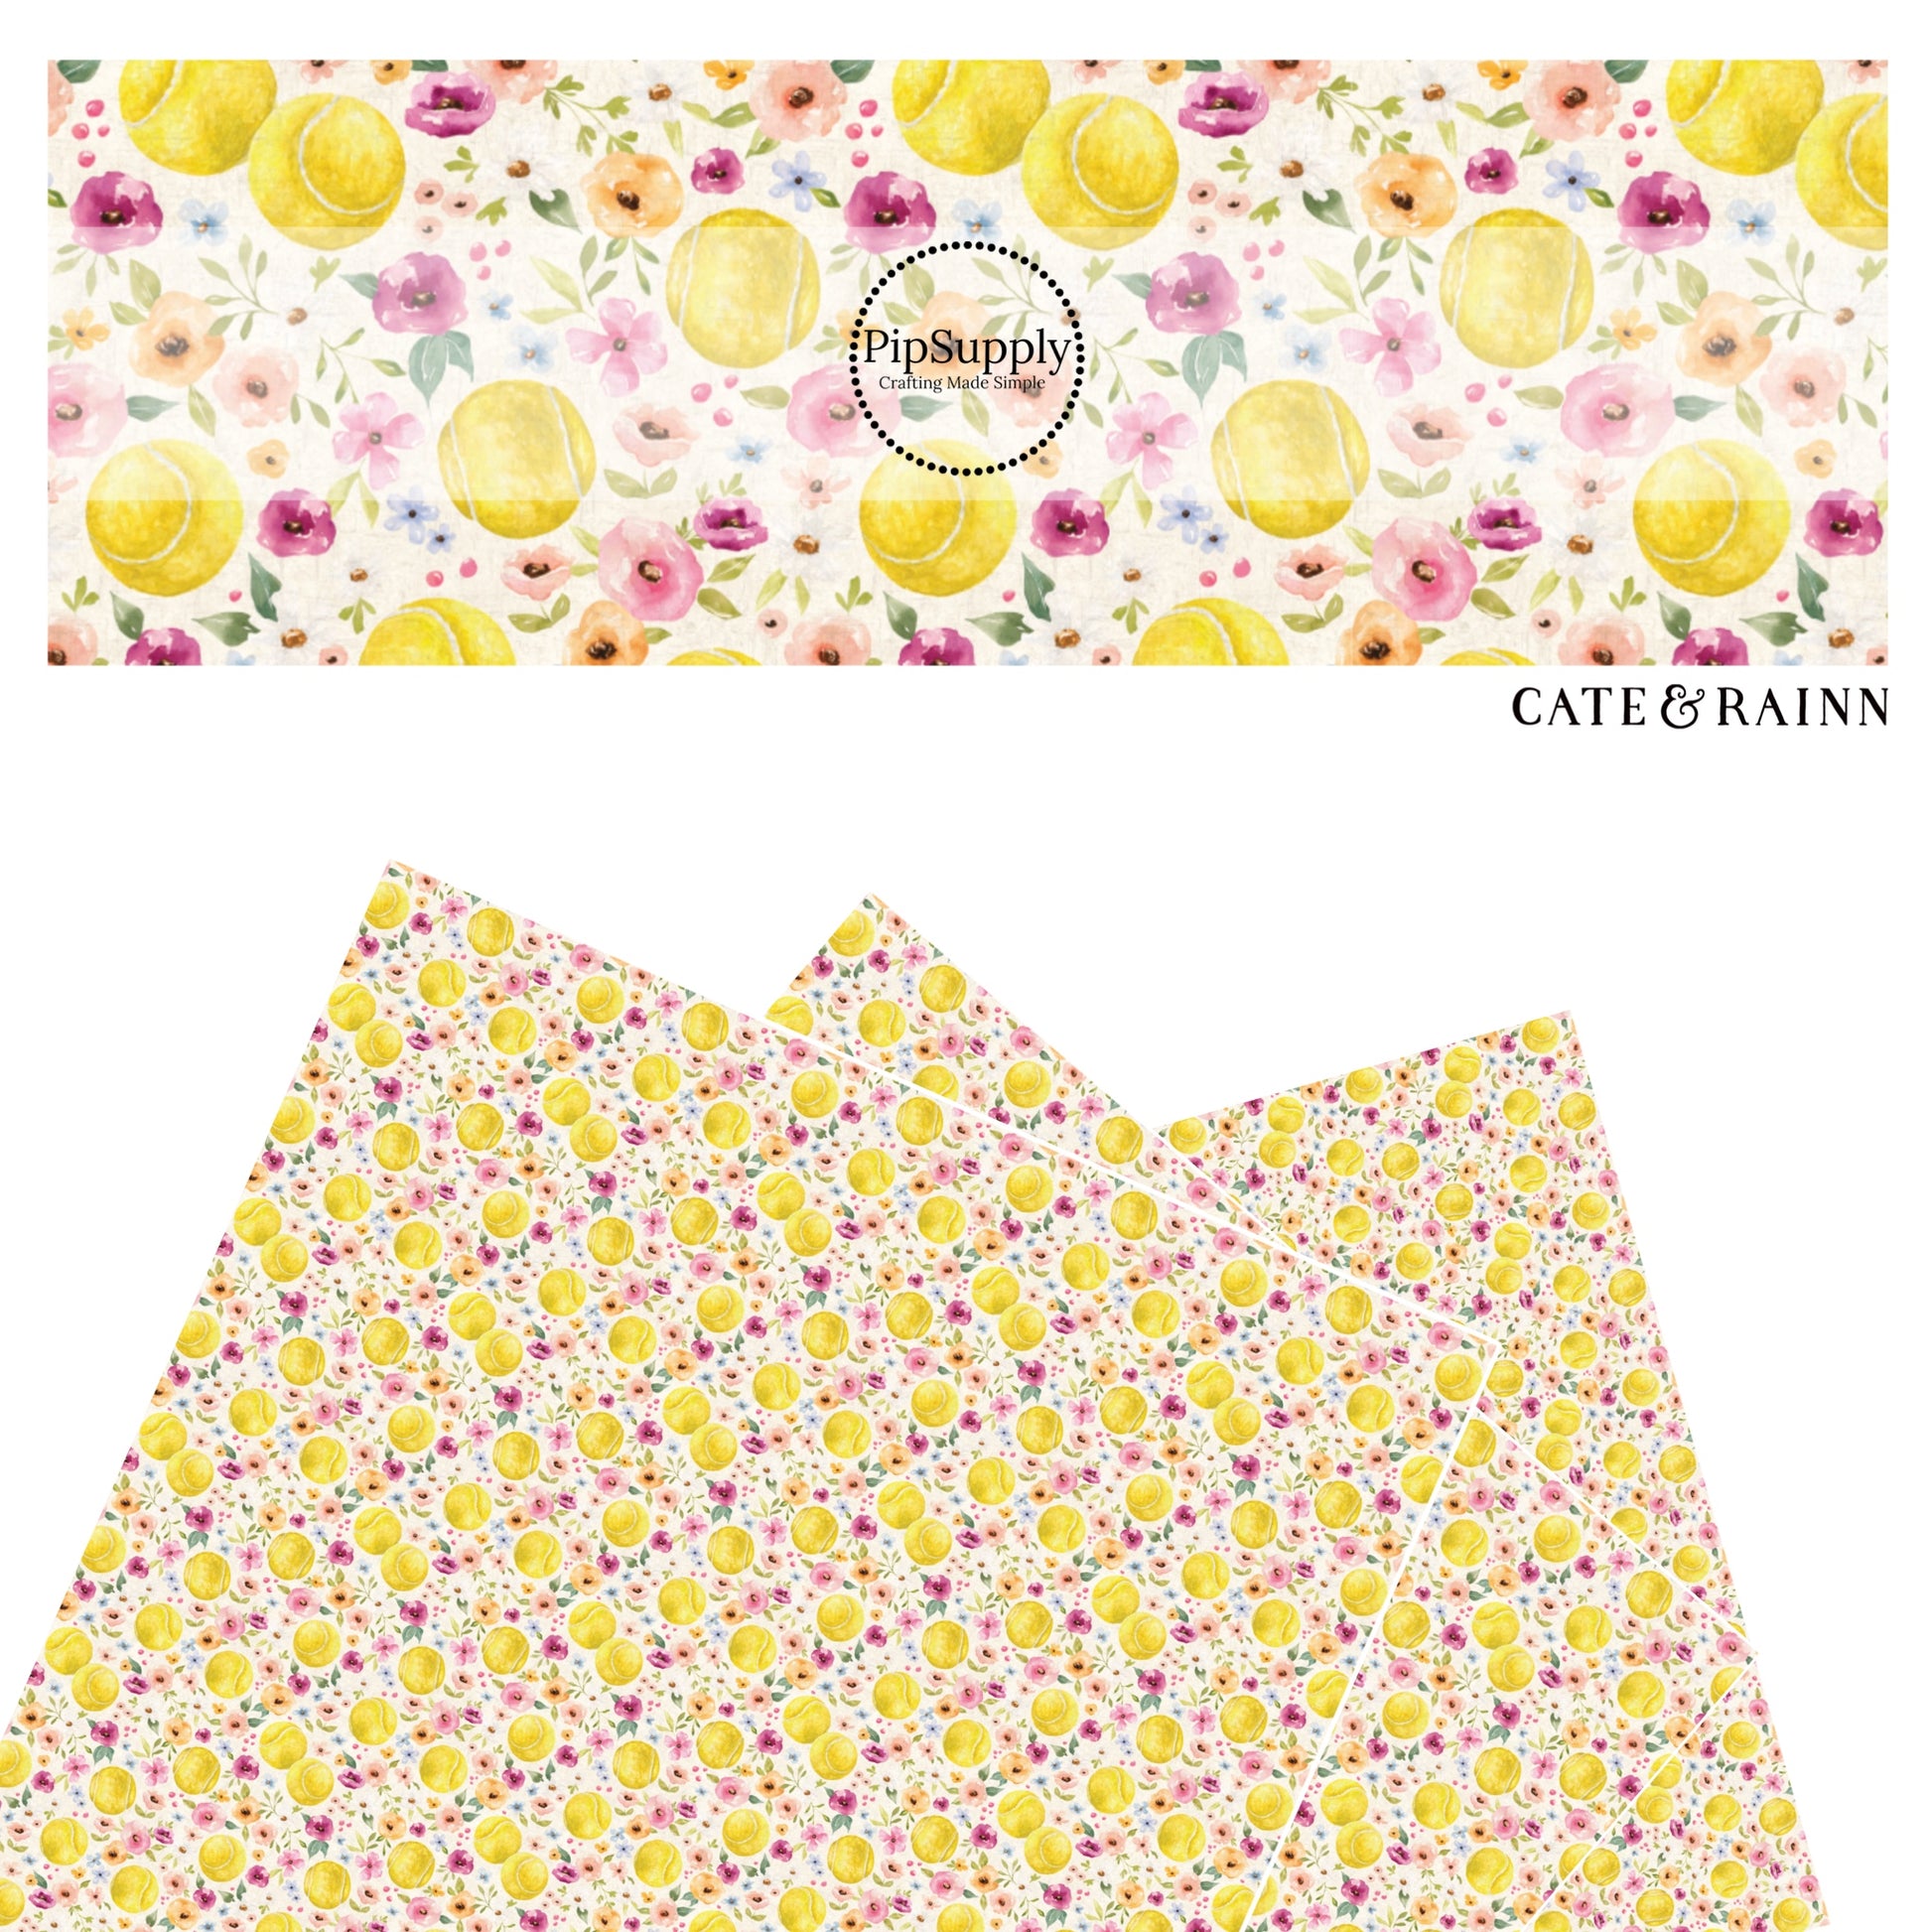 These spring floral sport pattern themed faux leather sheets contain the following design elements: tennis balls surrounded by flowers on cream. Our CPSIA compliant faux leather sheets or rolls can be used for all types of crafting projects.